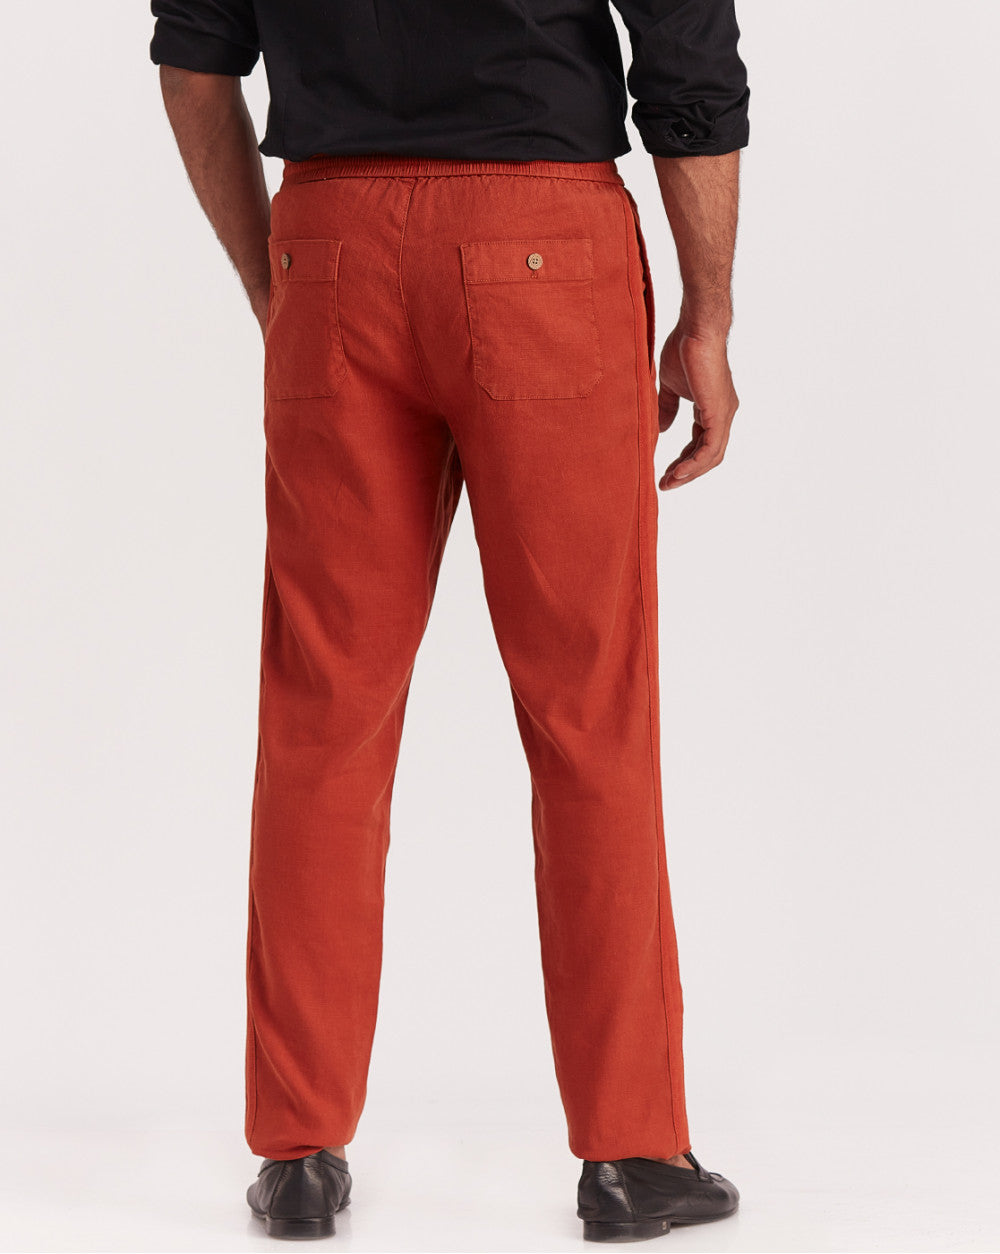 Tapered Fit Comfort Pants - Rust